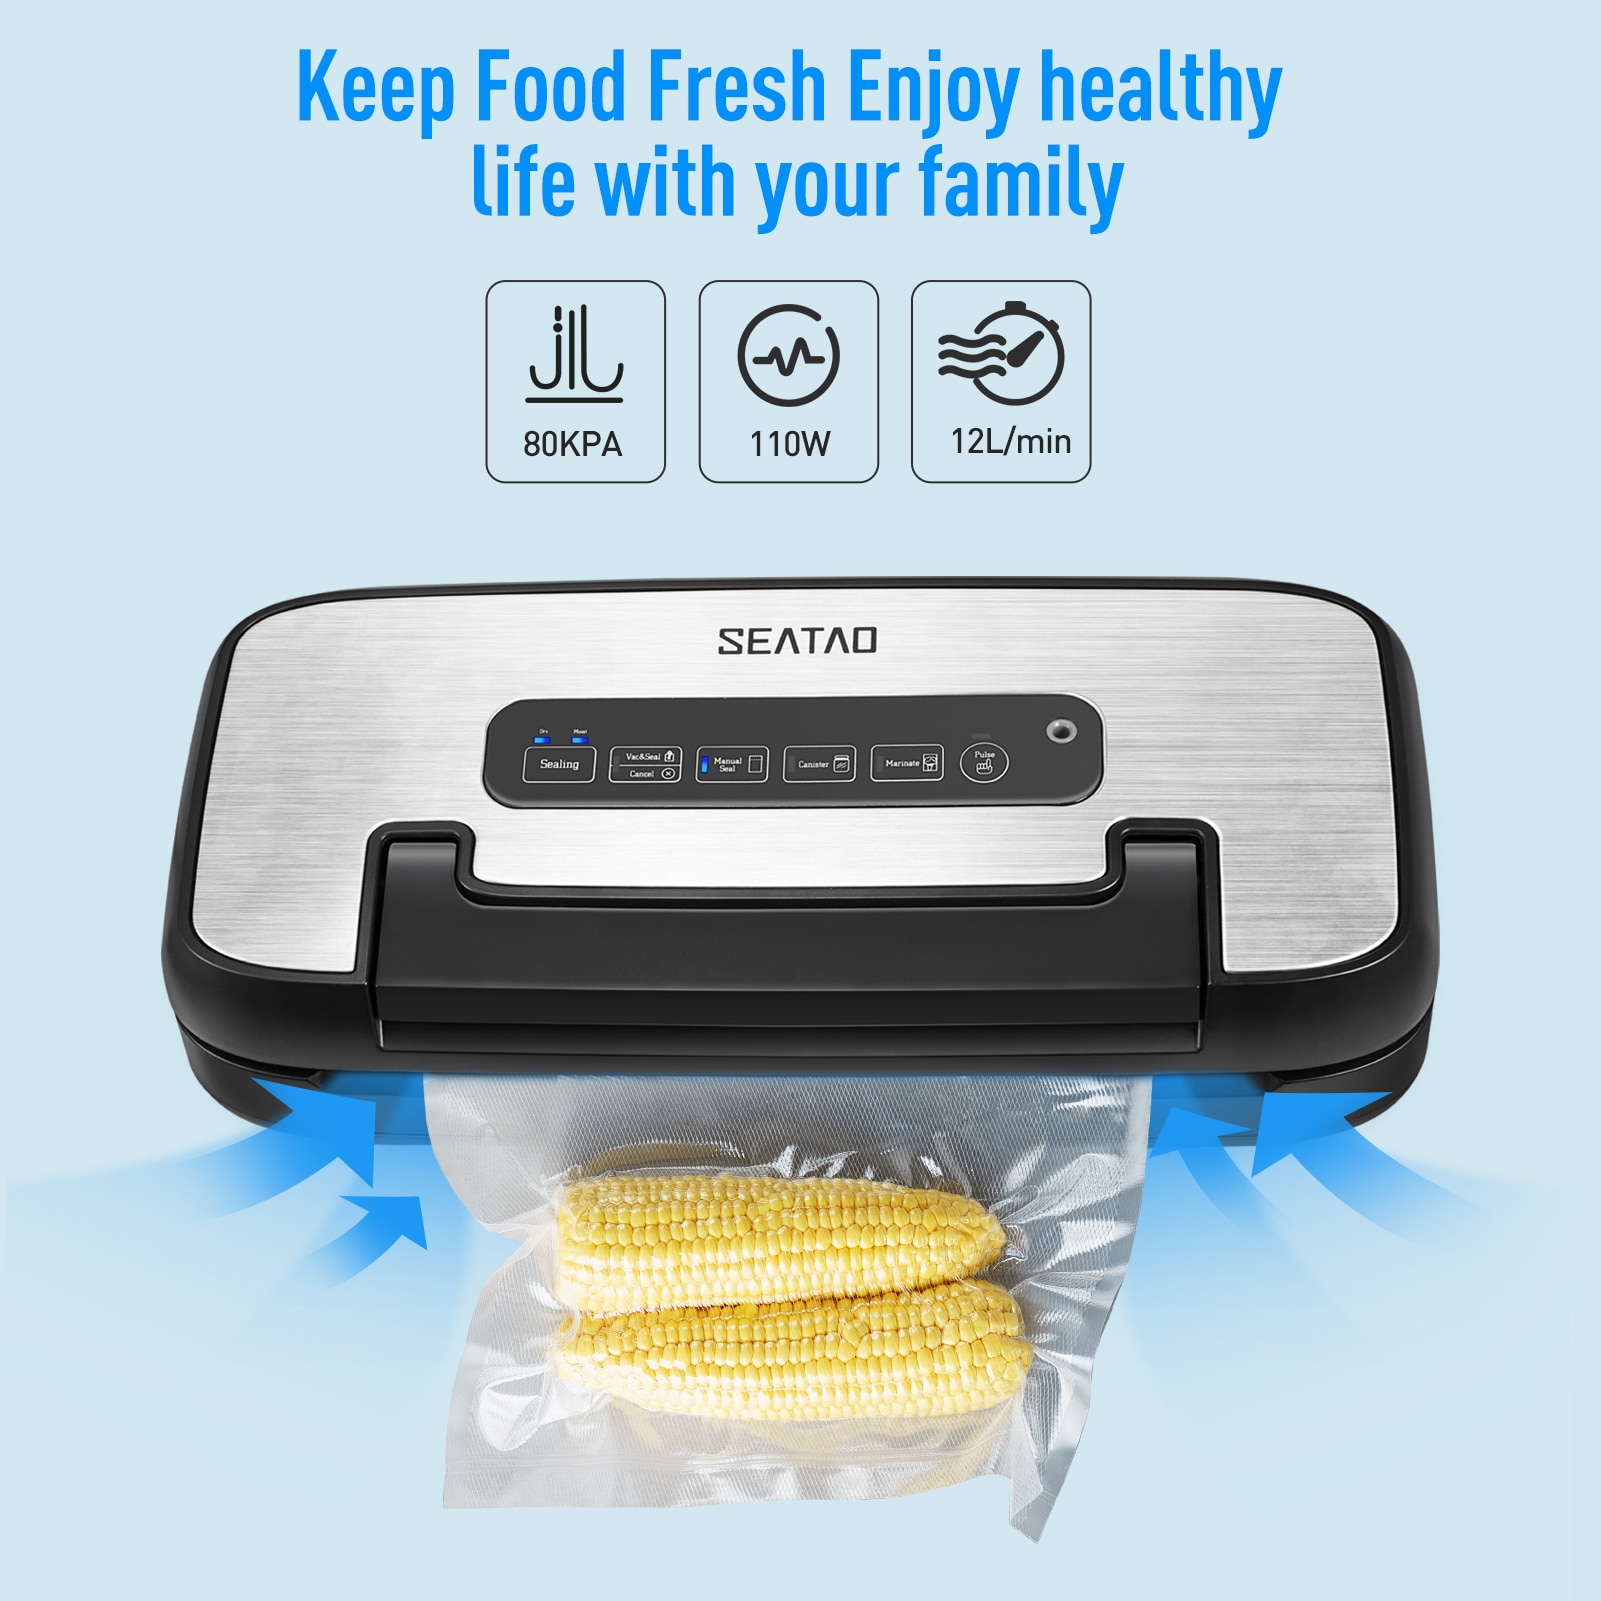 SEATAO VH5156 Vacuum Sealer Machine, 80kPa Automatic Air Sealing System for Food Saver with Built-in Roll Storage & Cutter